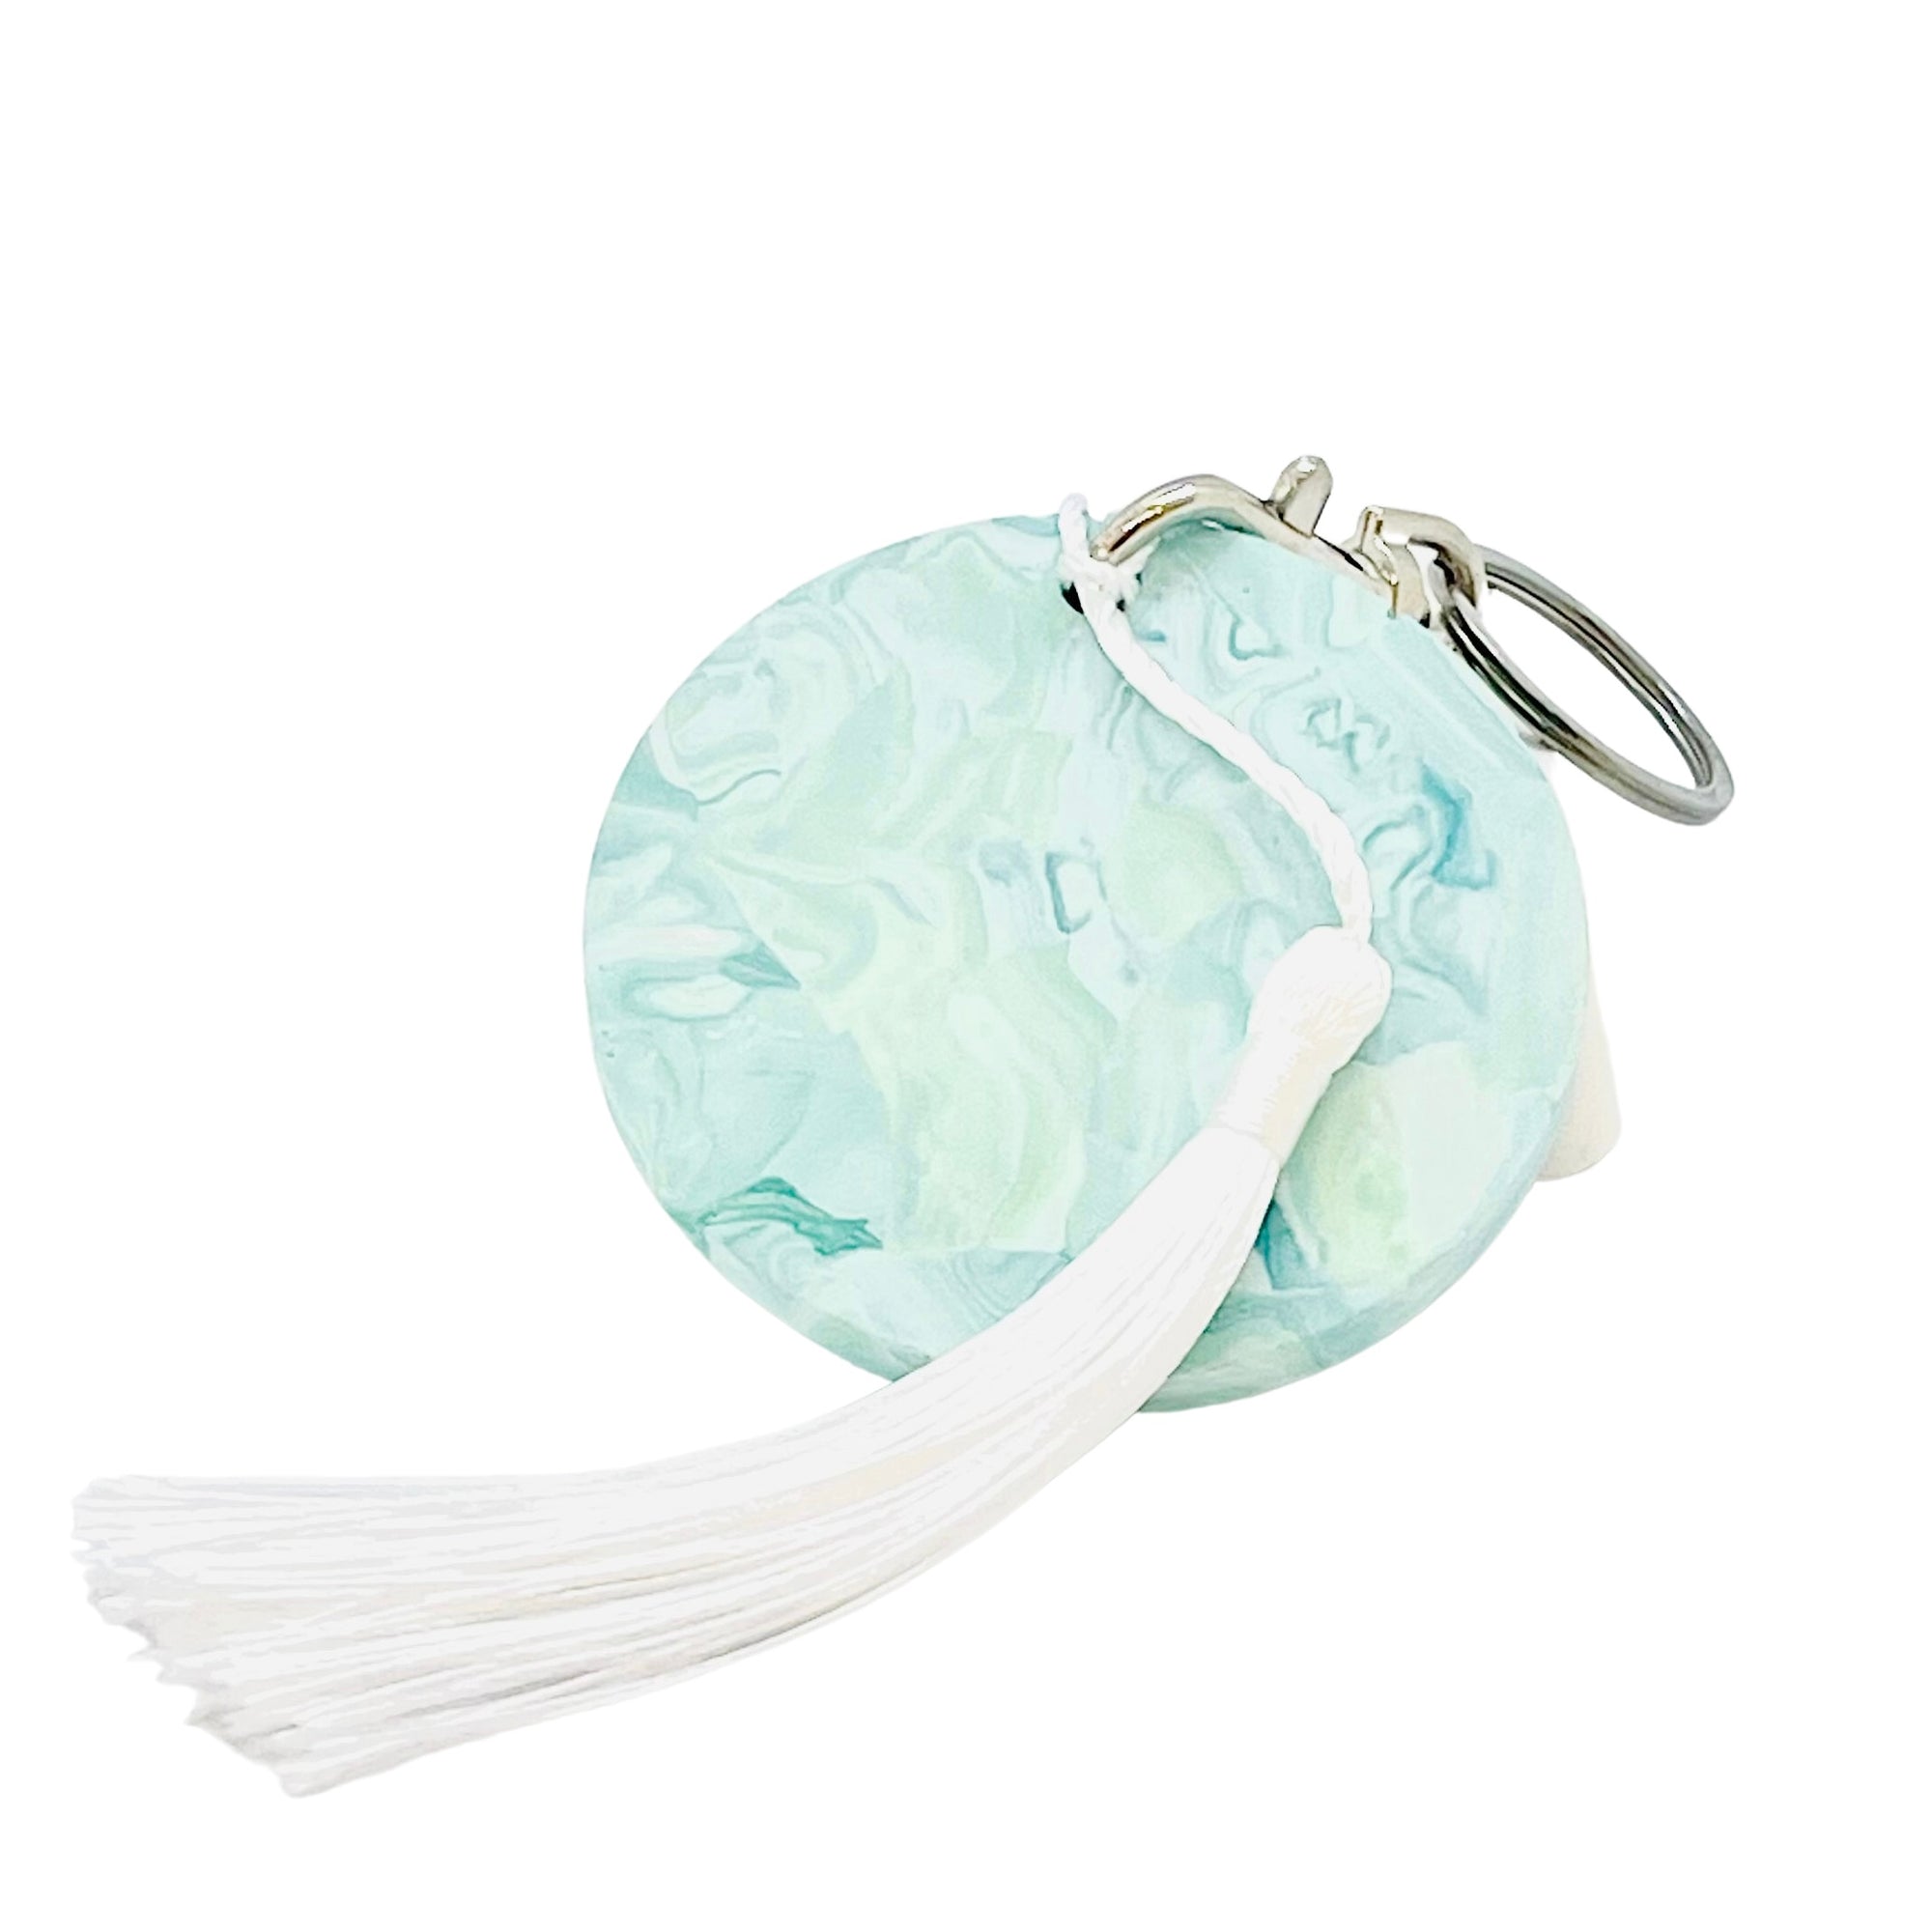 A round Jesmonite disc keyring measuring 6cm in diameter marbled with turquoise pigment.